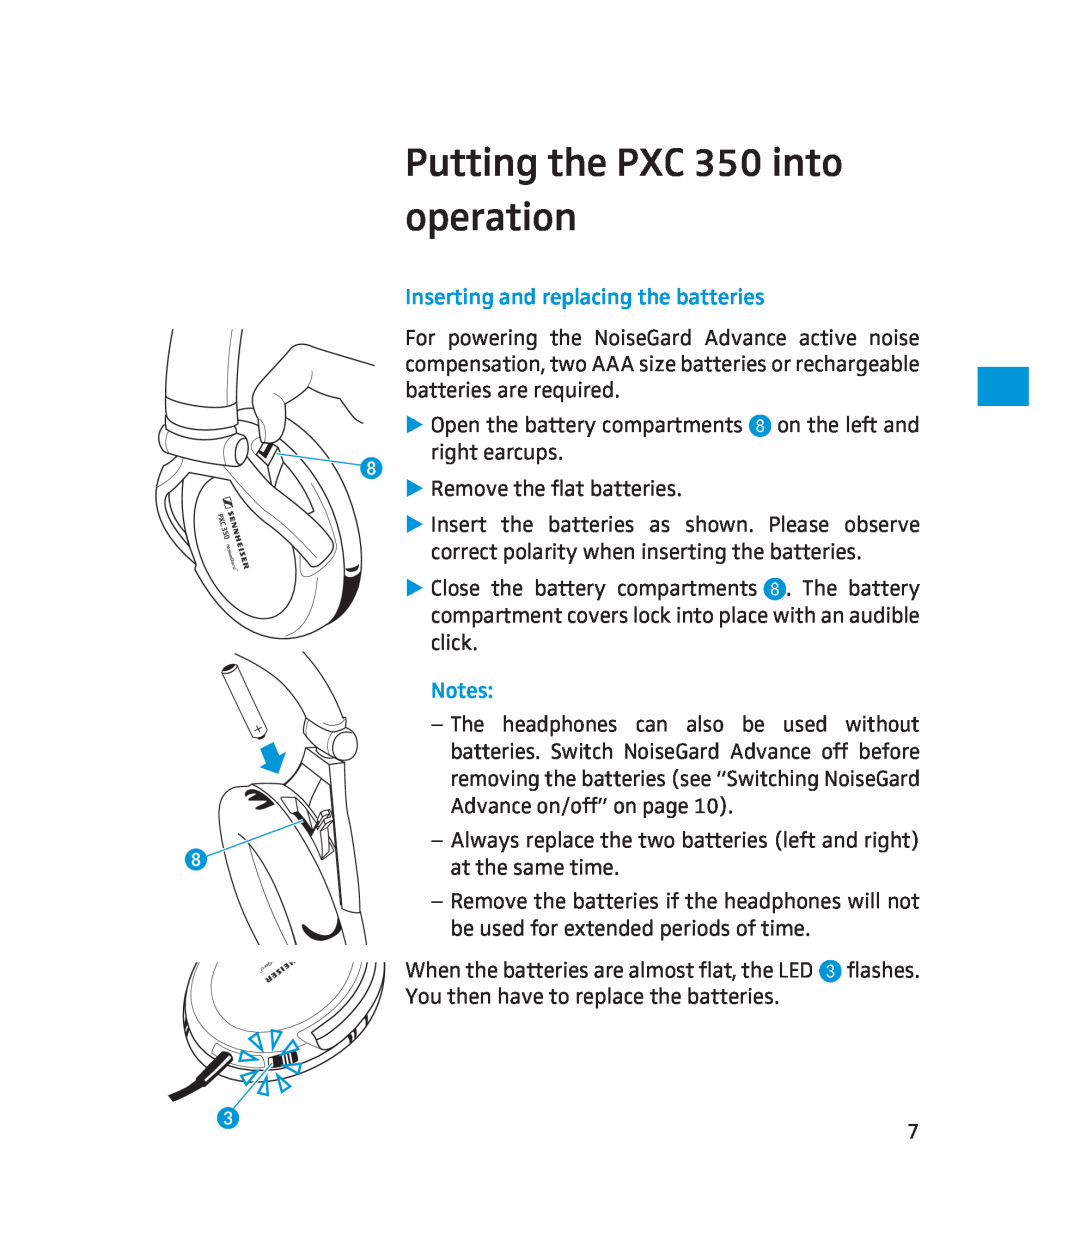 Sennheiser instruction manual Putting the PXC 350 into operation, Inserting and replacing the batteries 